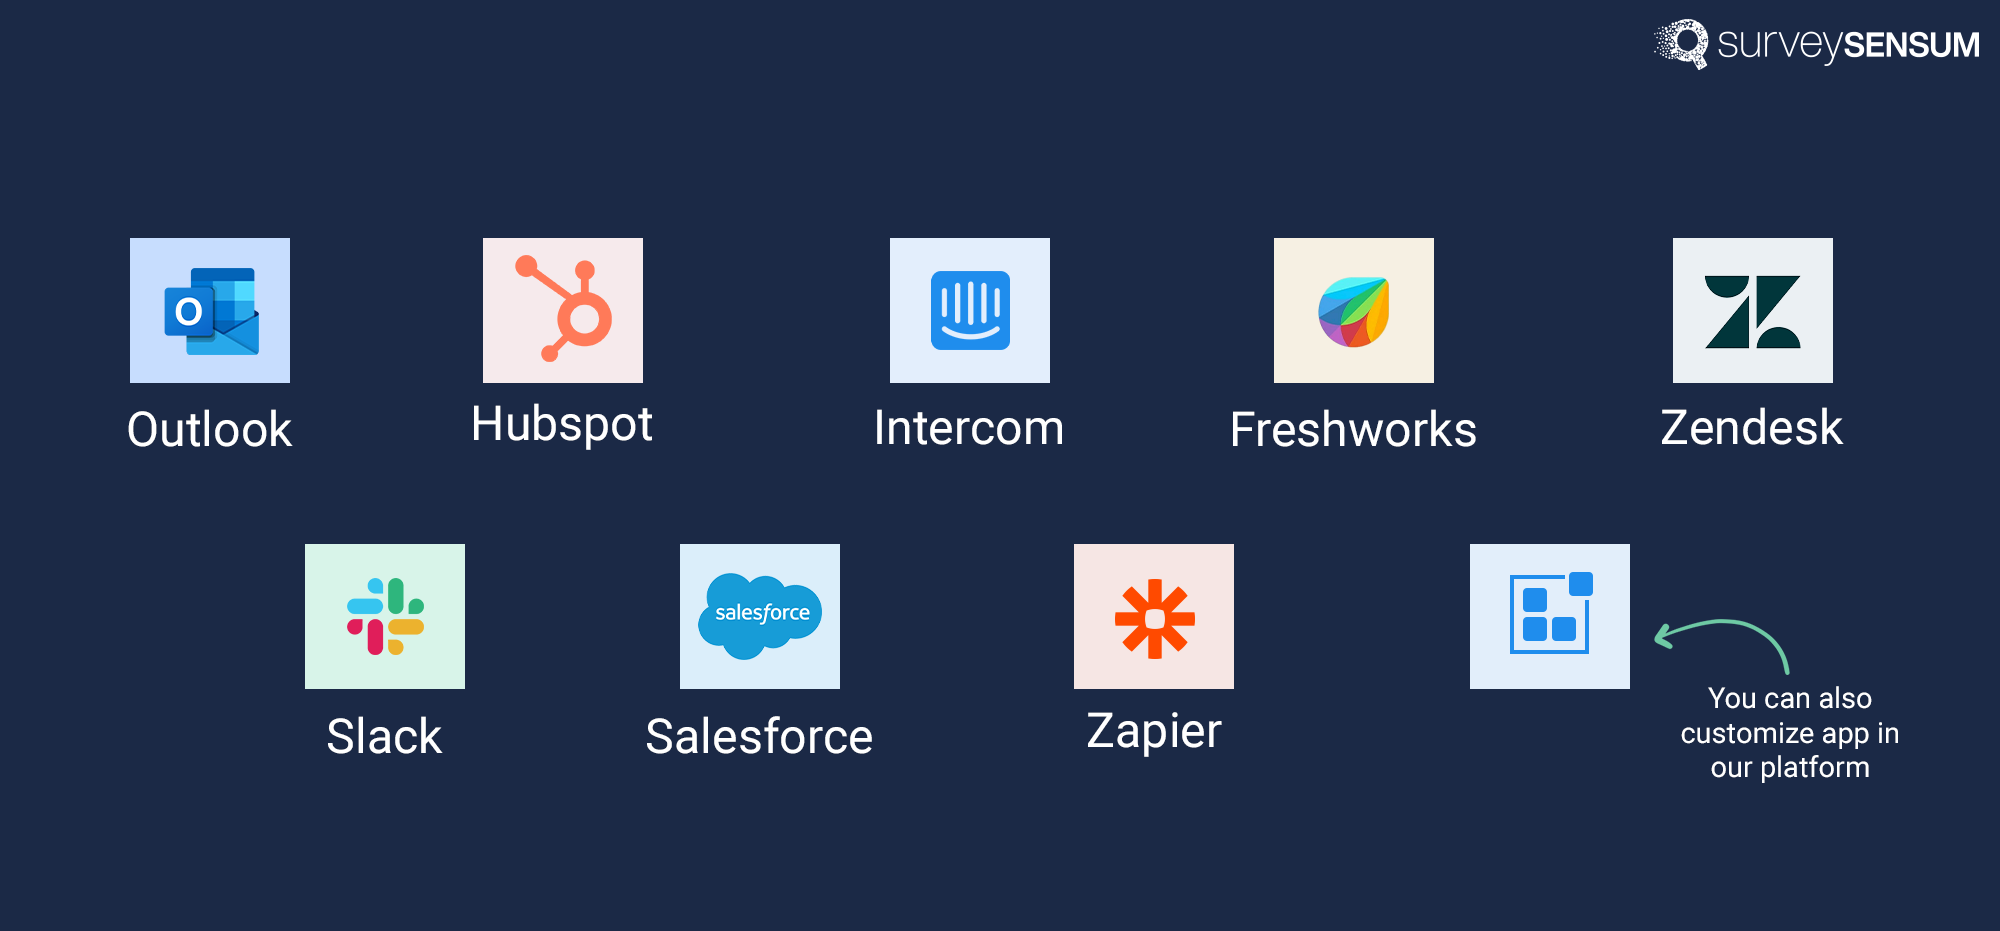 This is the image of third-party integrations of SurveySensum with tools like Zapier, Outlook, Hubspot, etc.